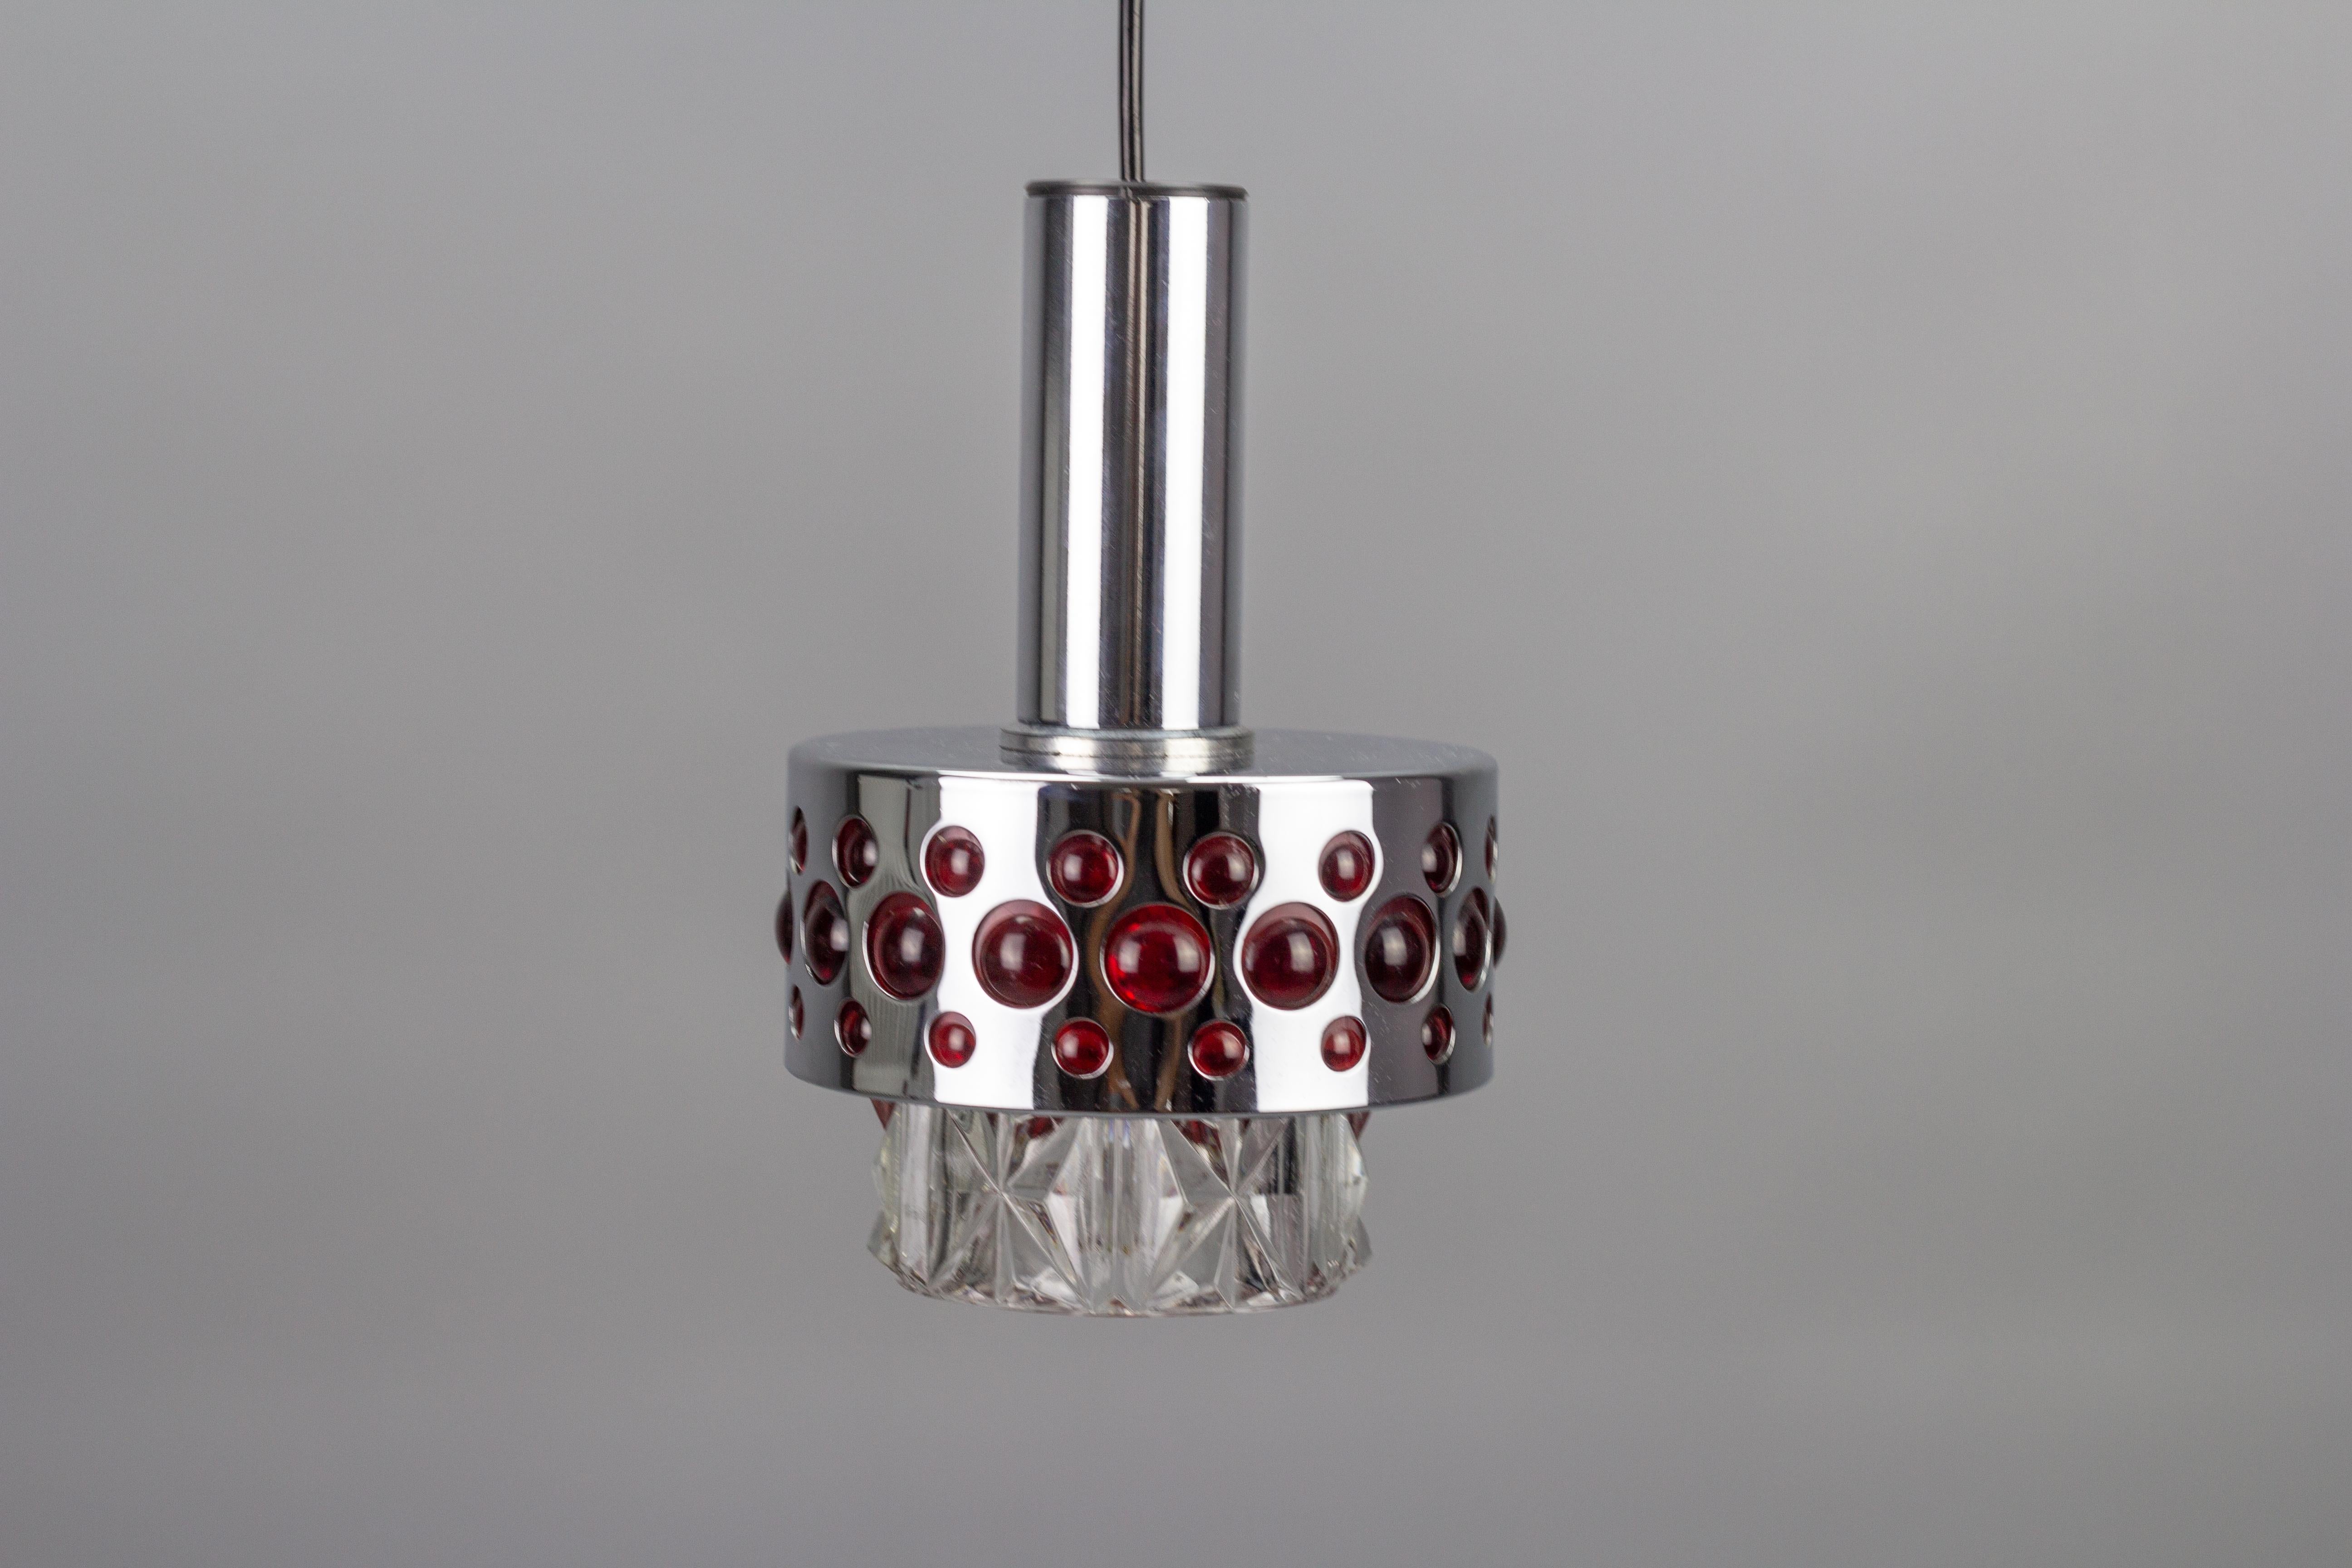 German Mid-Century Modern Chrome and Red Pendant Light by Richard Essig, 1970s For Sale 6